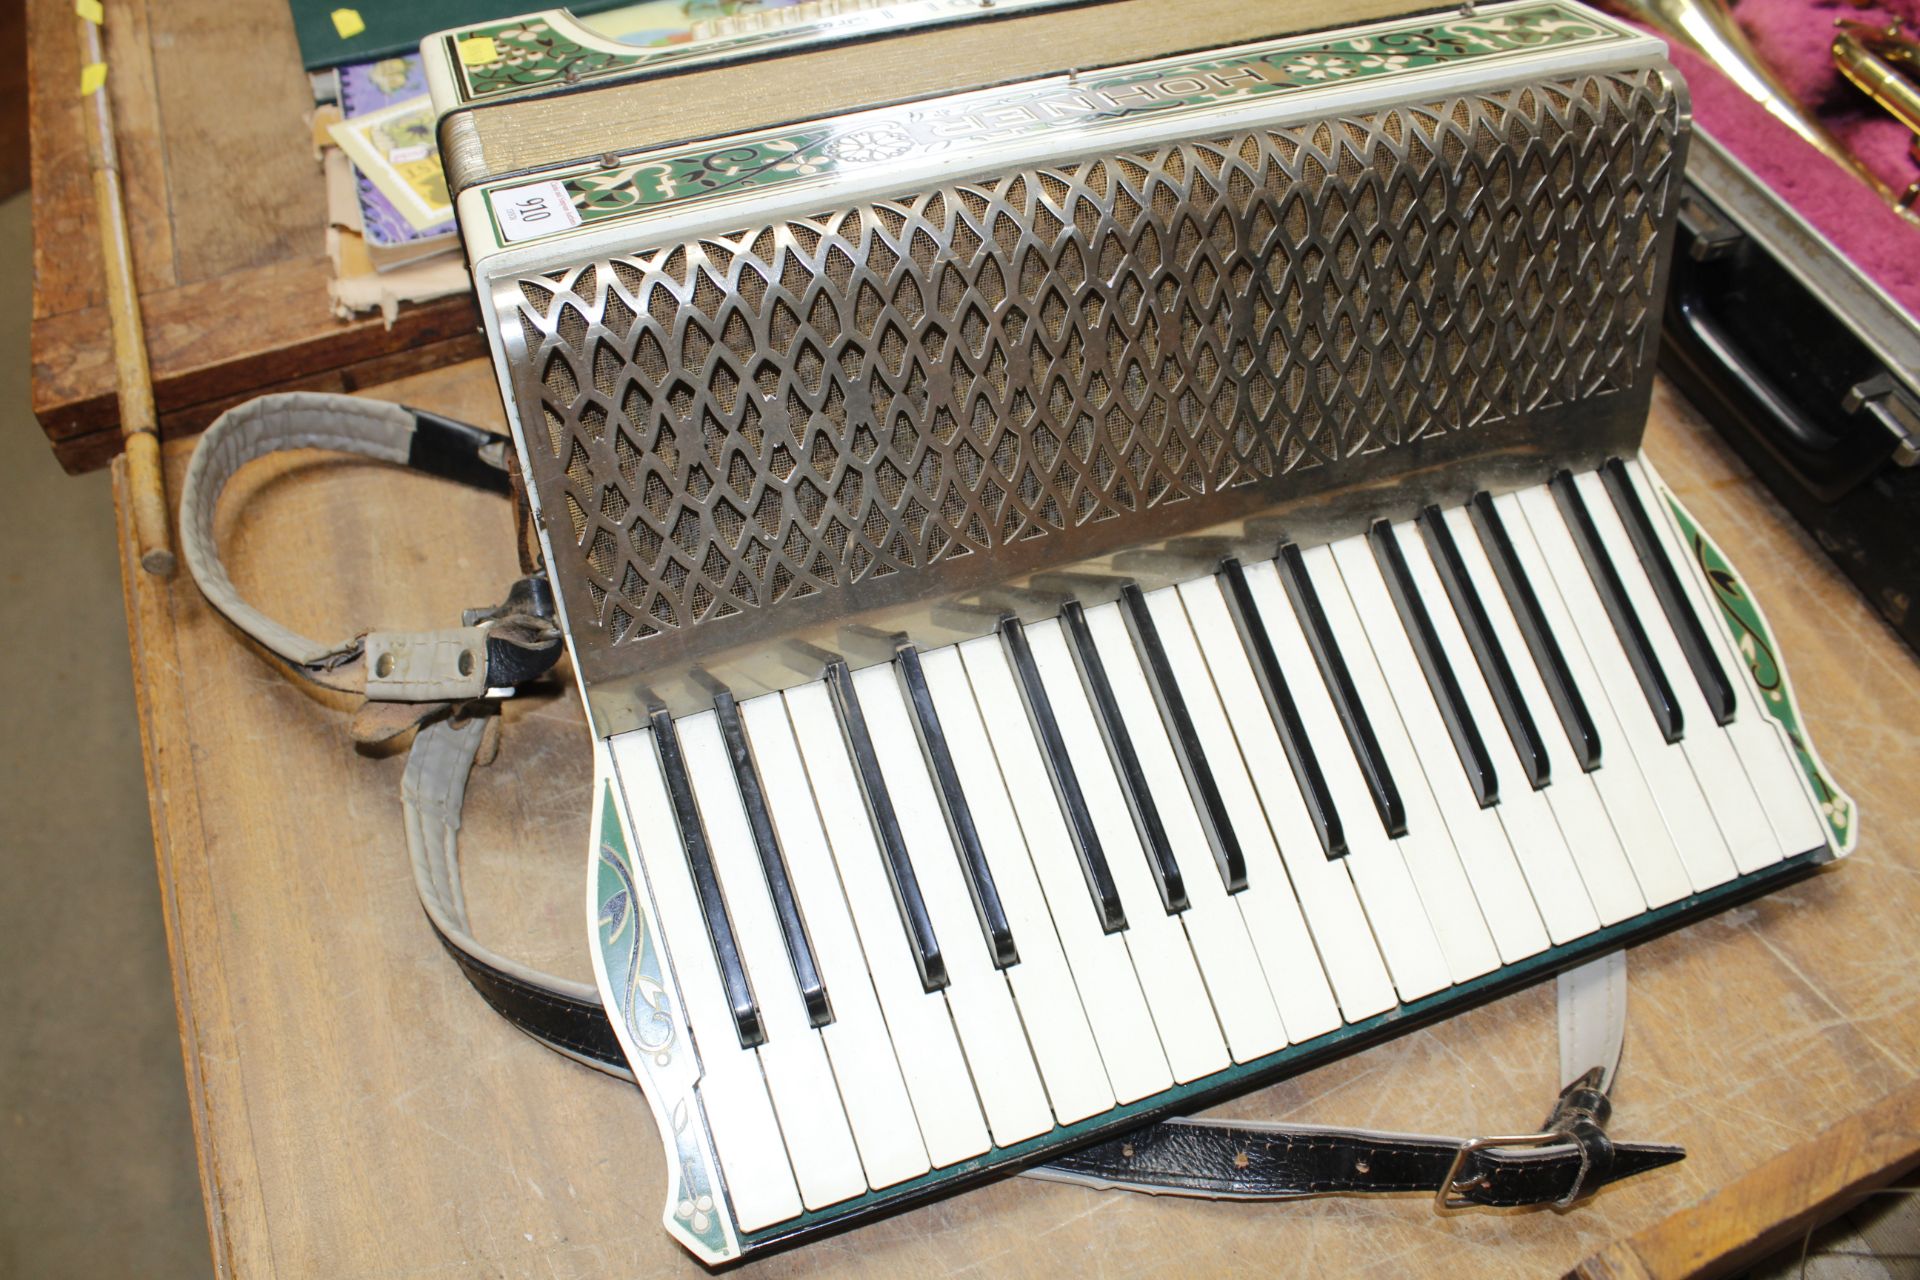 A Hohner piano accordion - Image 3 of 3